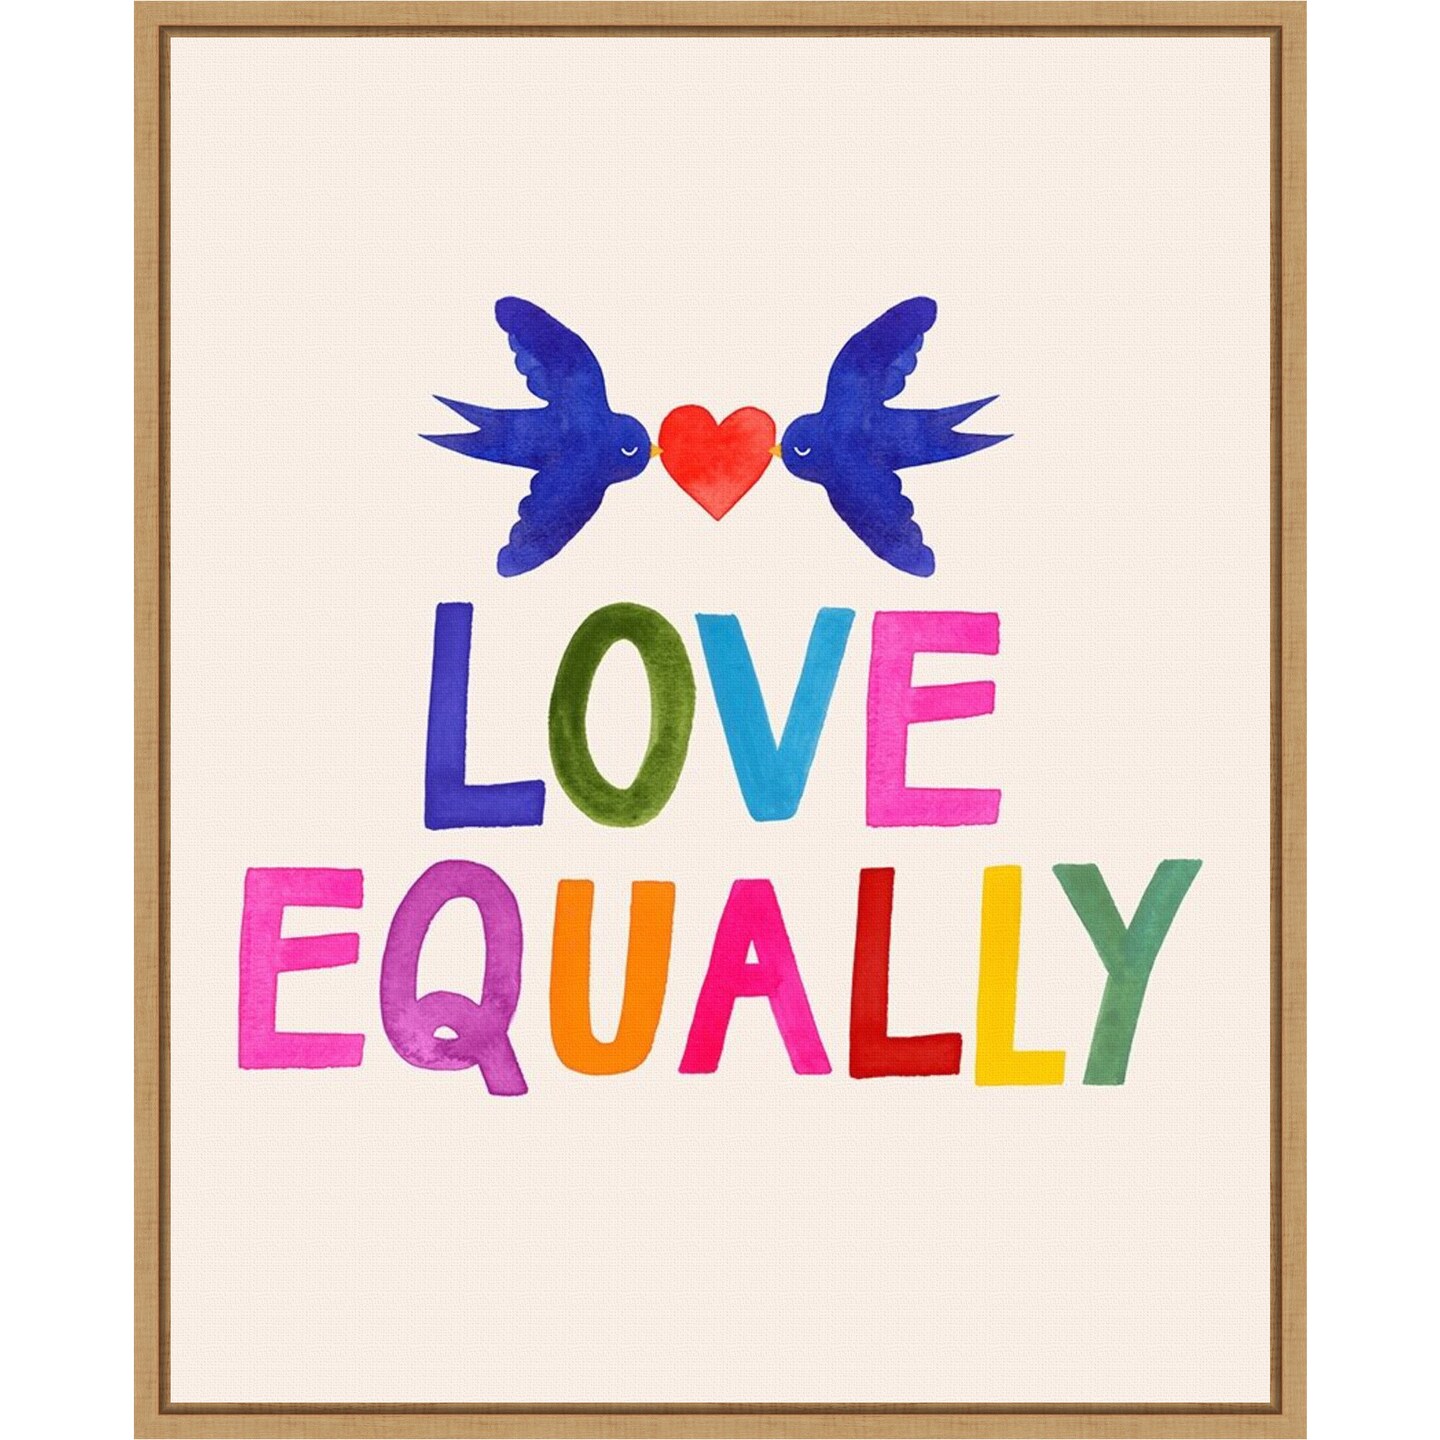 Love Loudly II by Victoria Barnes 16-in. W x 20-in. H. Canvas Wall Art Print Framed in Natural